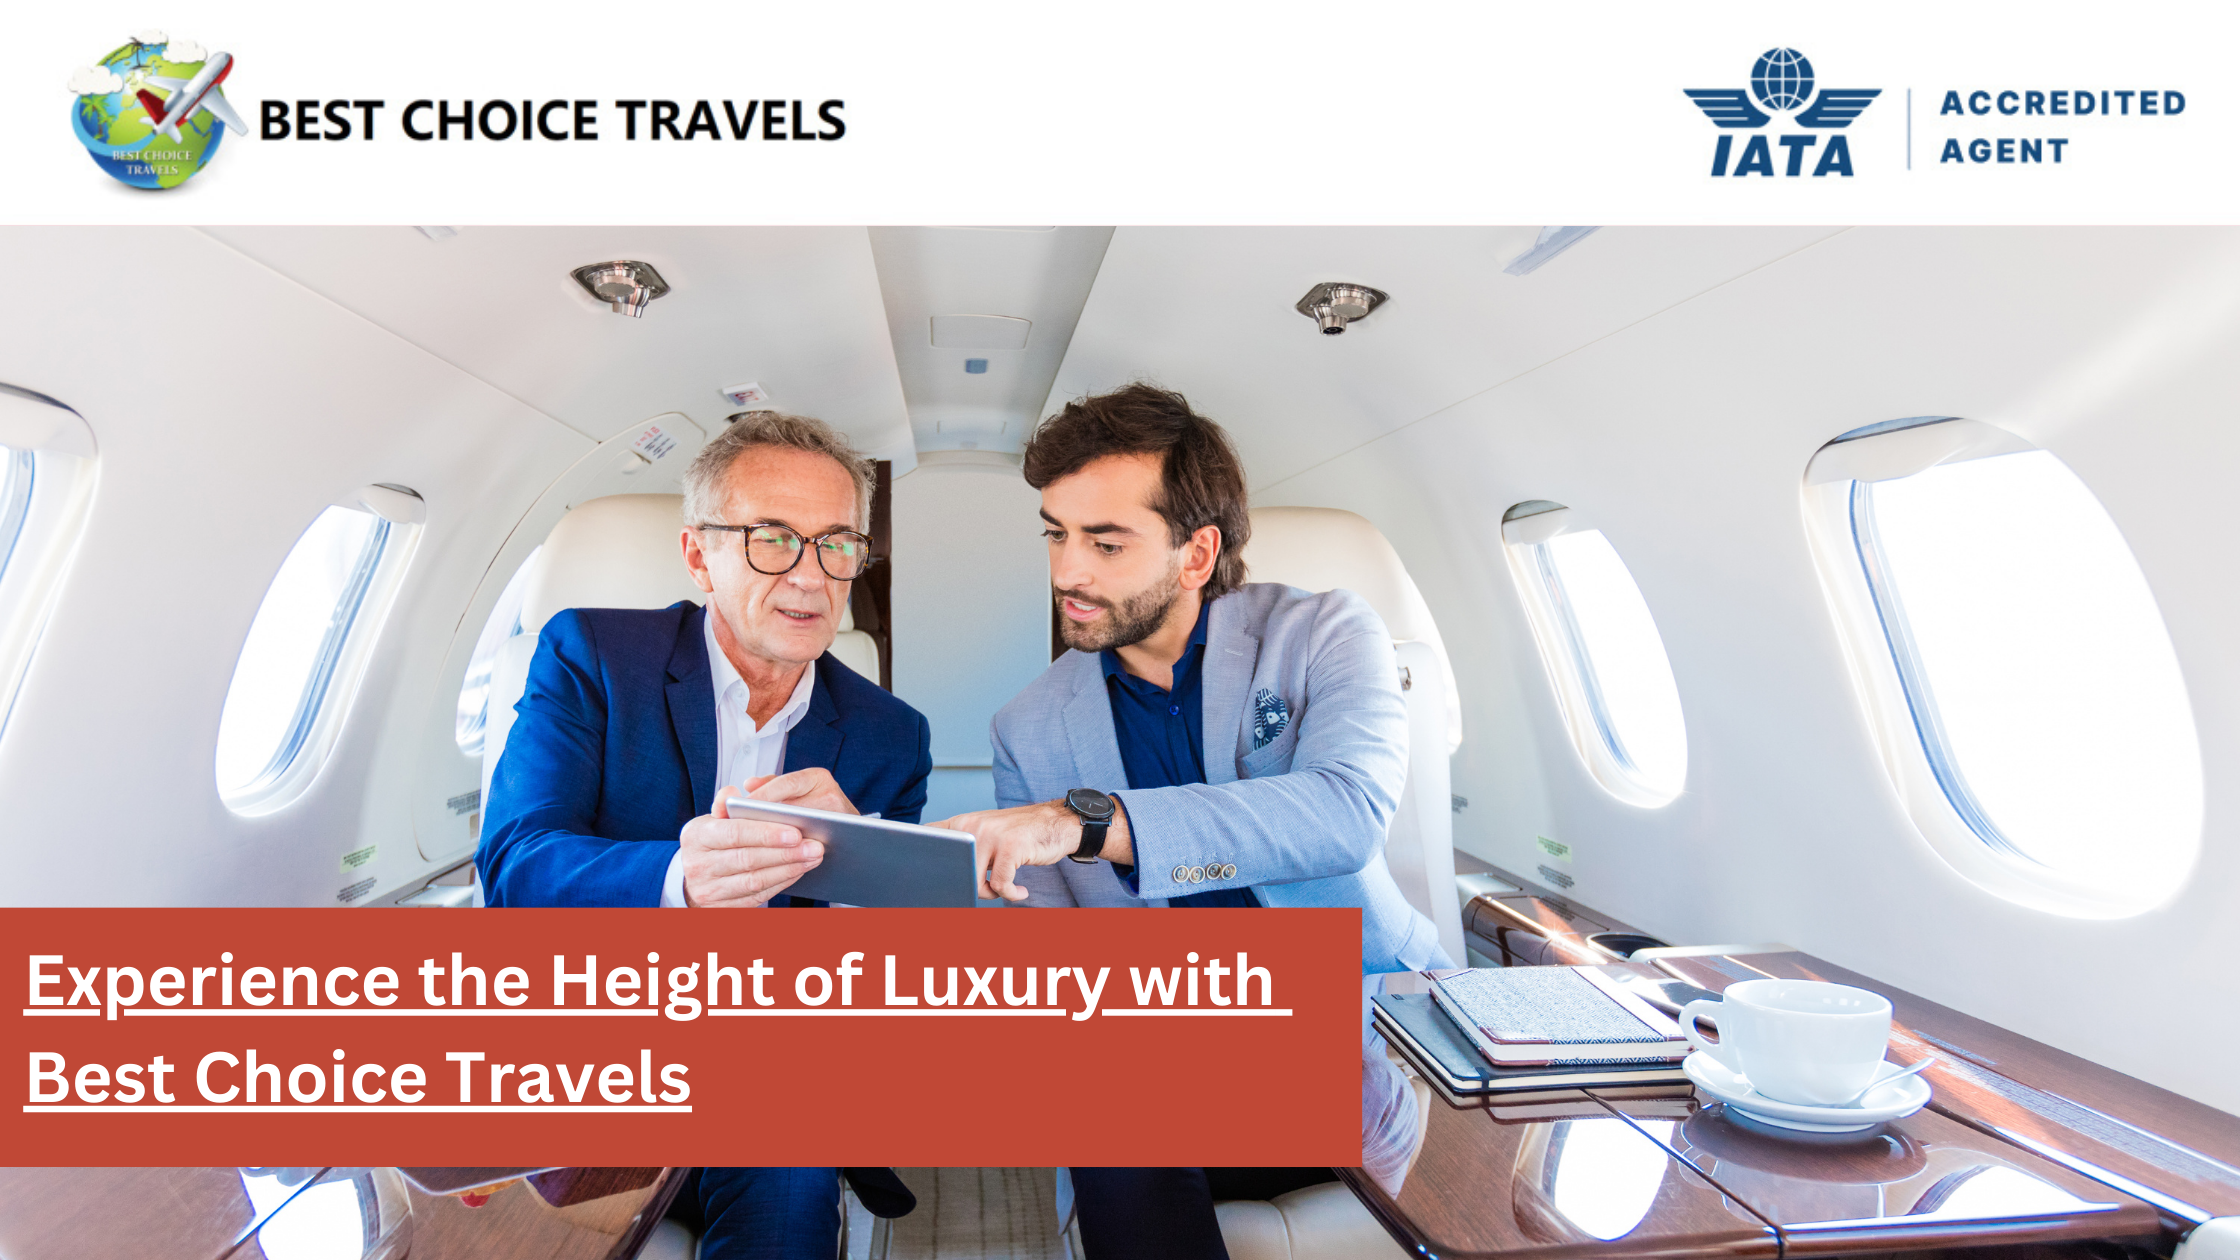 Are You Tired of the Ordinary When It Comes To VIP Air Travel?